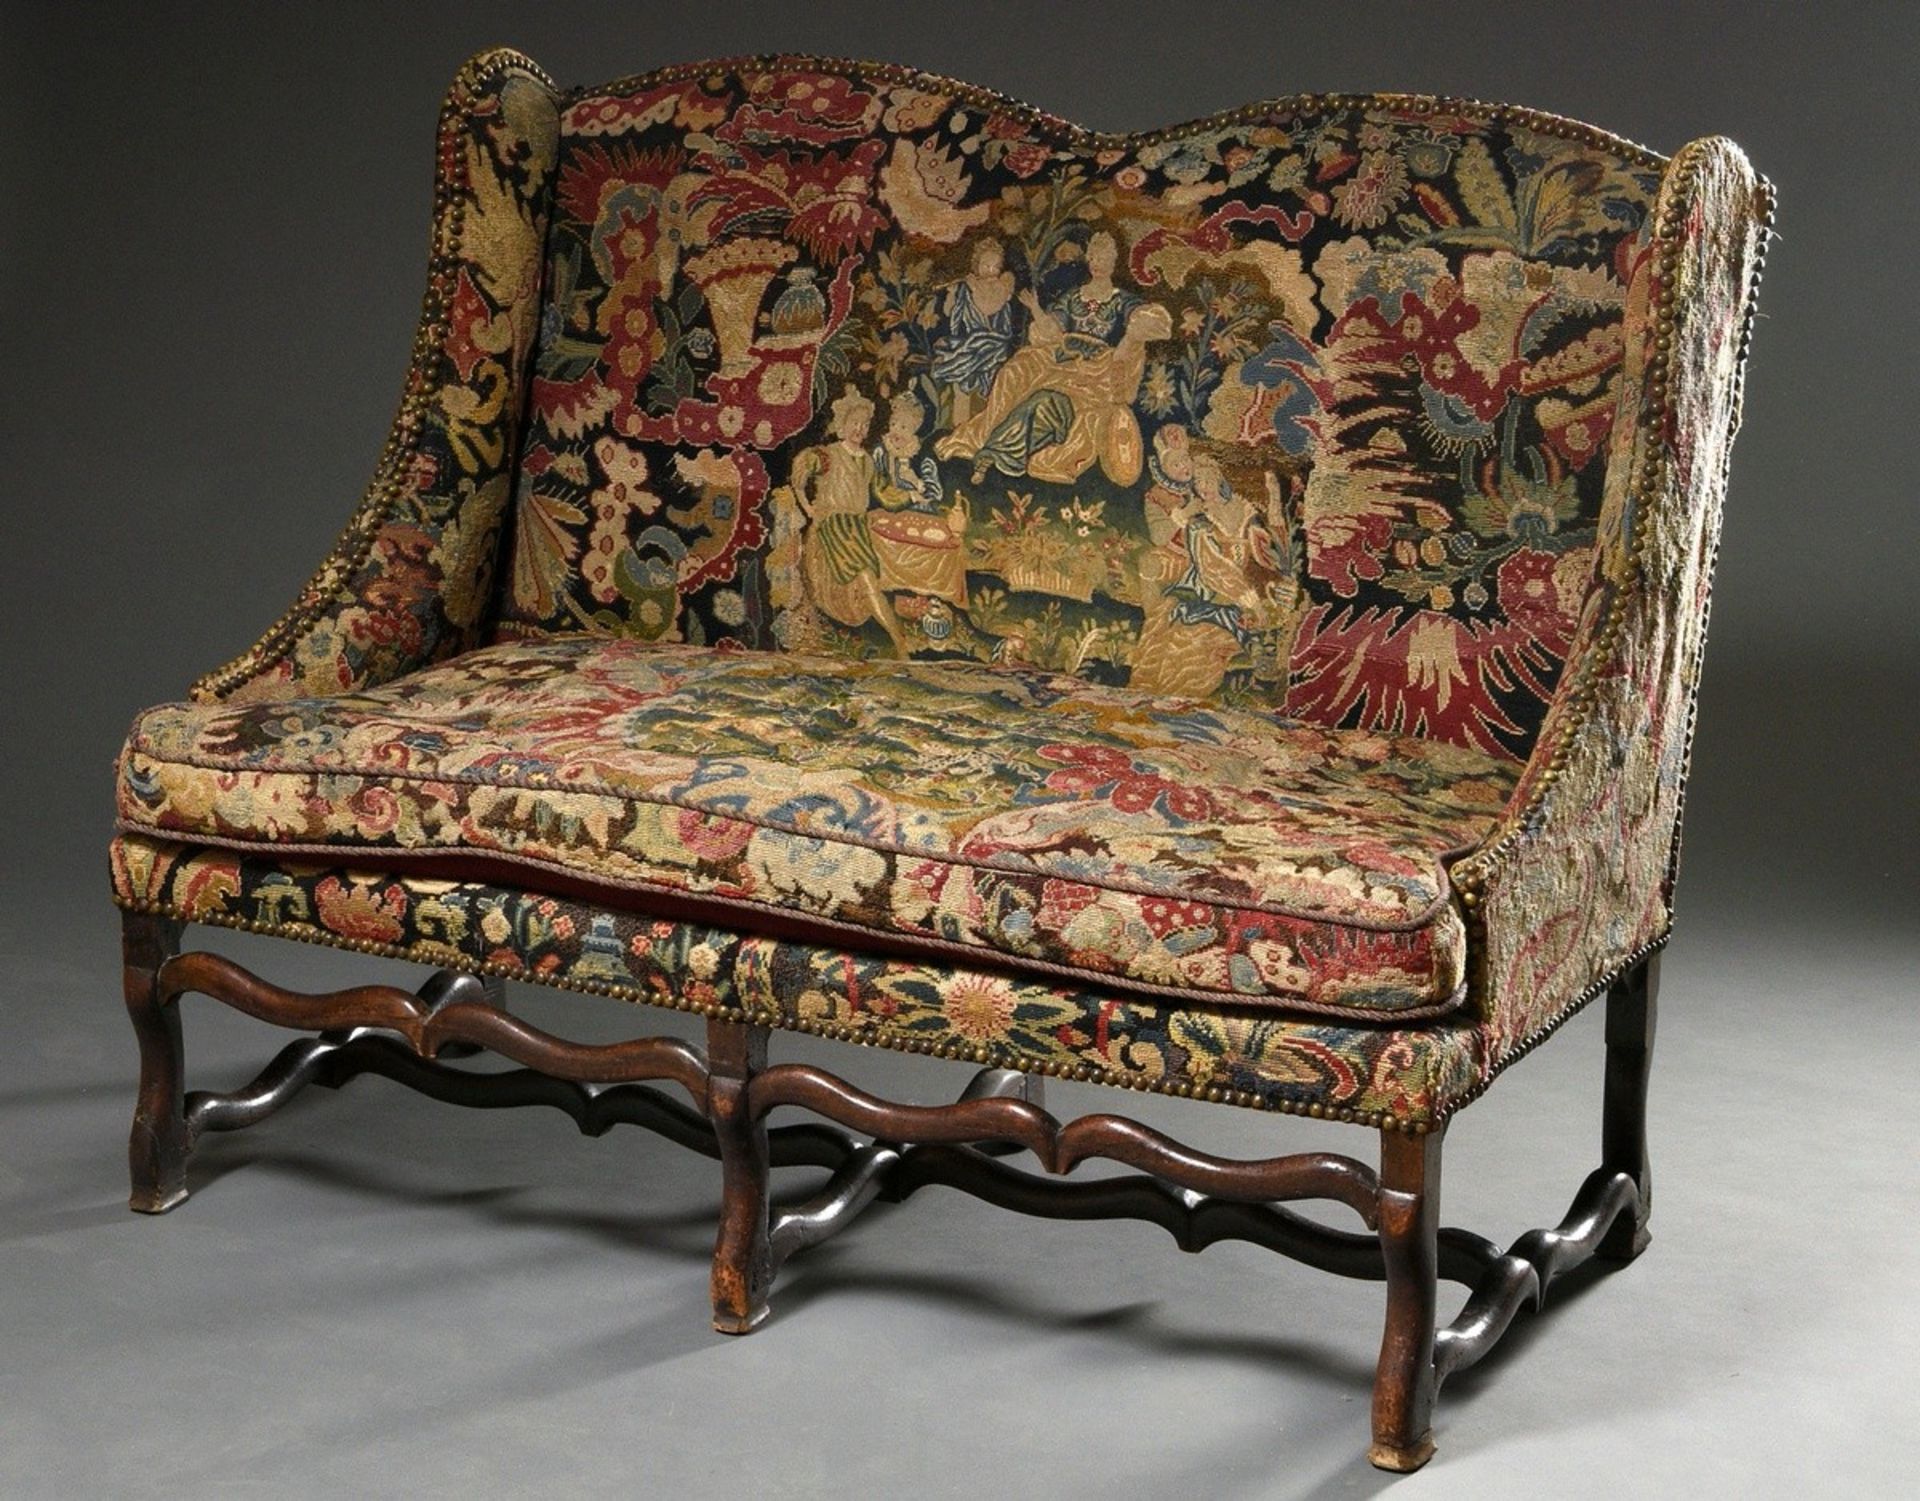 William & Mary "Loveseat" bench with carved frame and original embroidered upholstery "Lovers and H